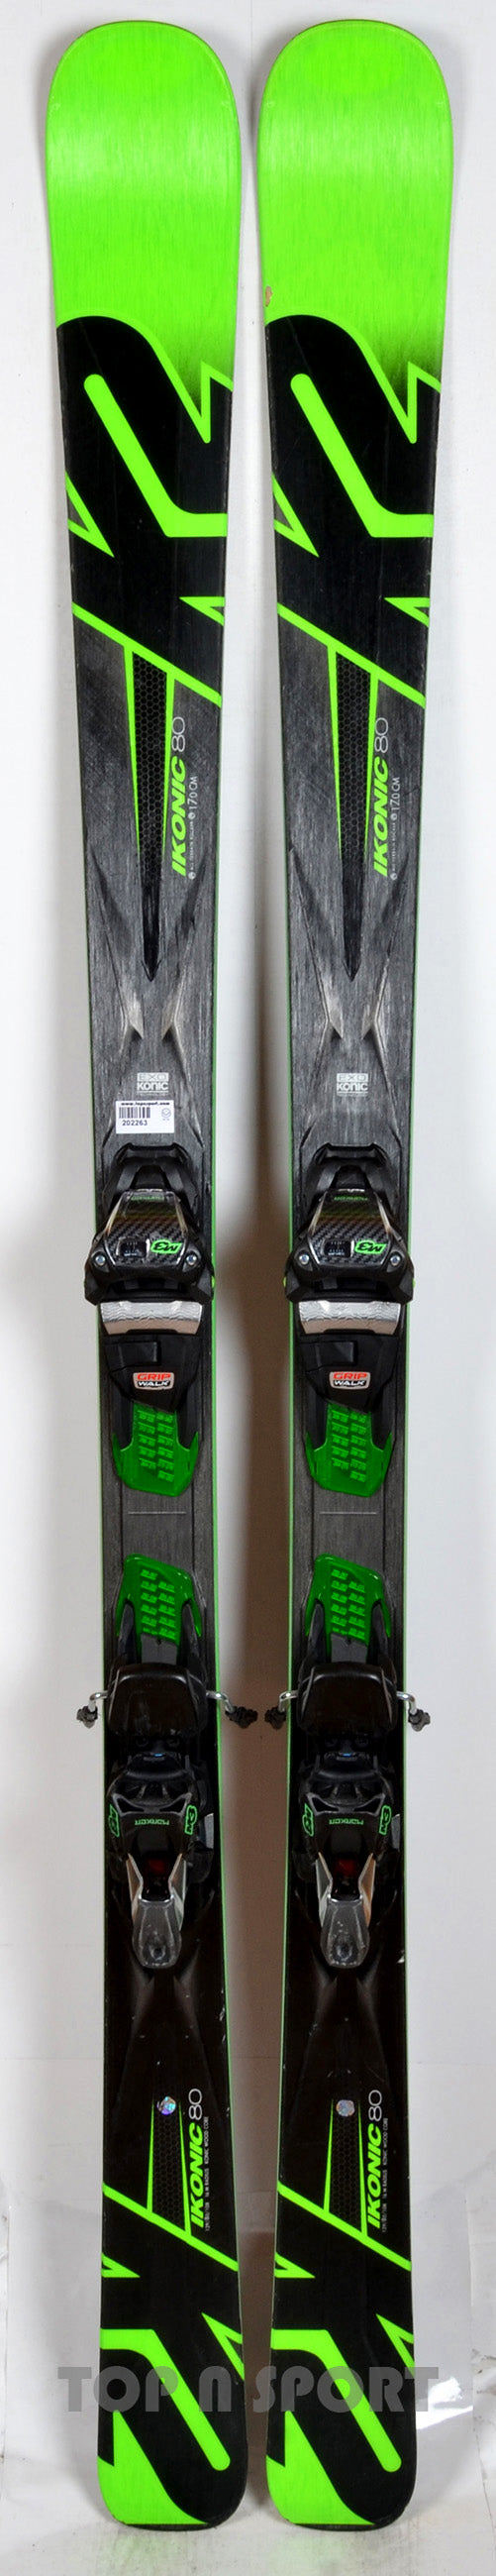 K2 iKONIC 80 green - skis d'occasion